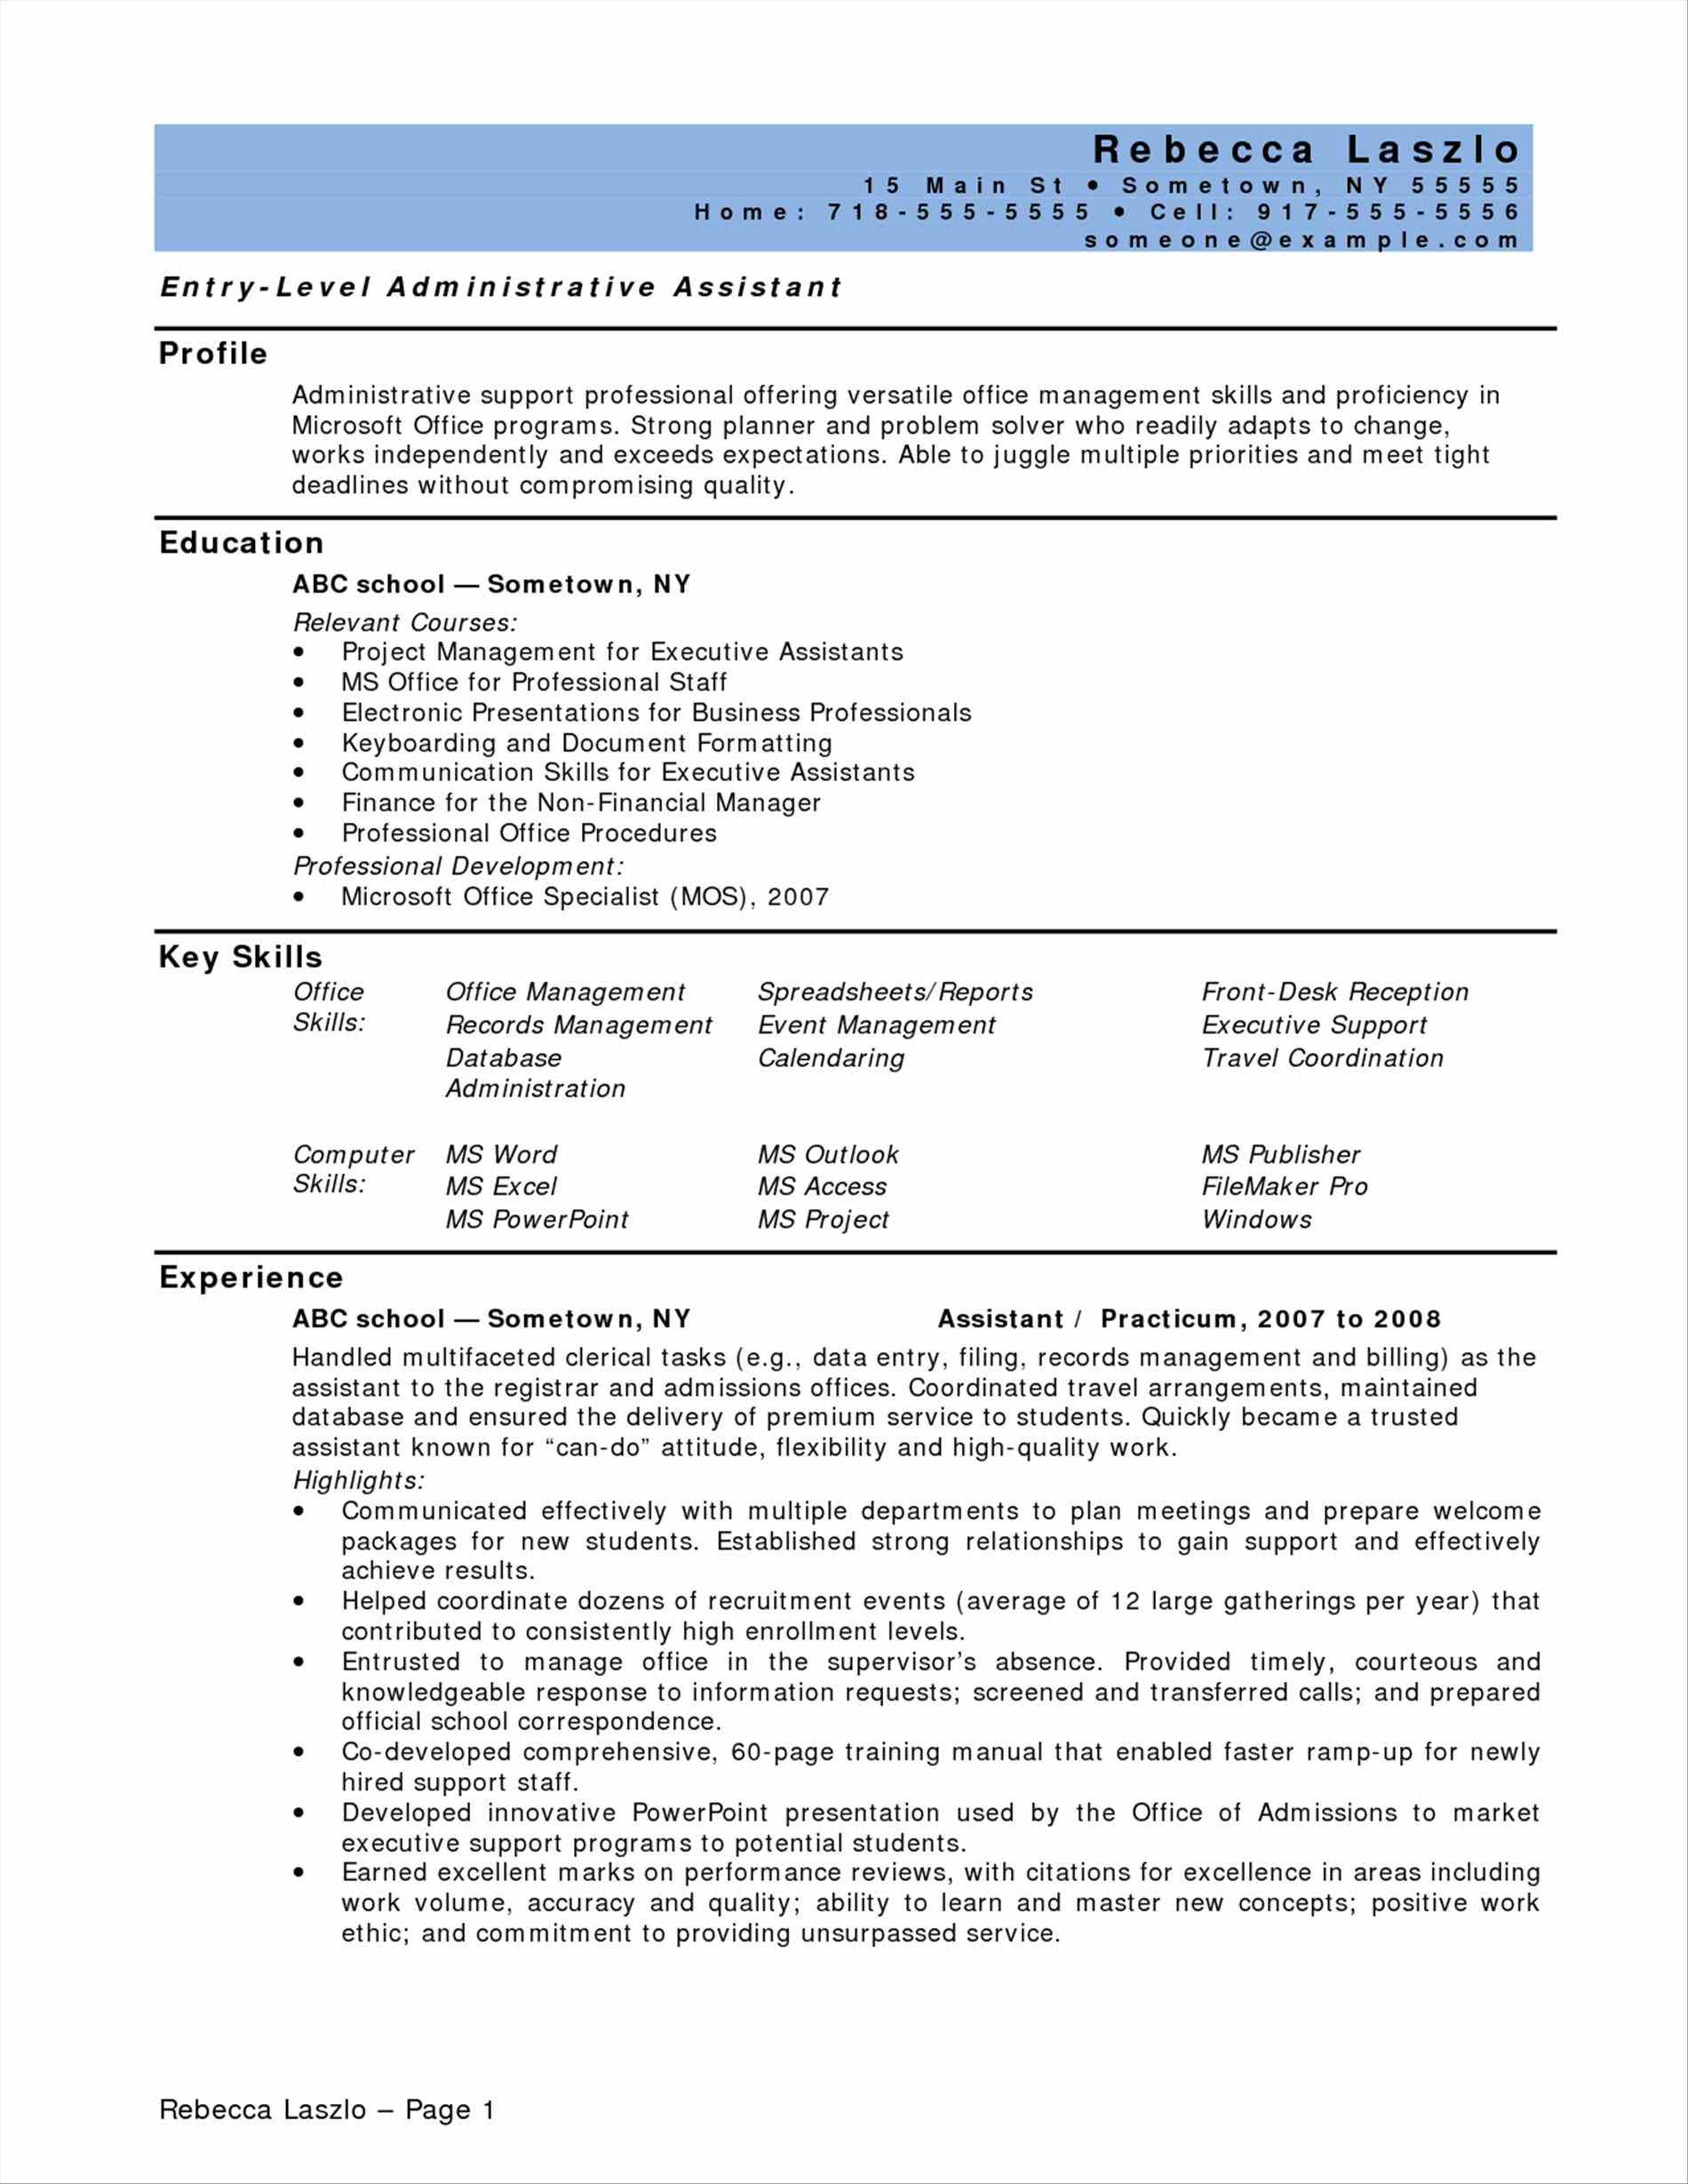 Examples Of Objectives For Resumes Summary Resume Examples Administrative Assistant Luxury Assistant Resume Skills Sample Objective Medical Free Medical Of Summary Resume Examples Administrative Assi examples of objectives for resumes|wikiresume.com